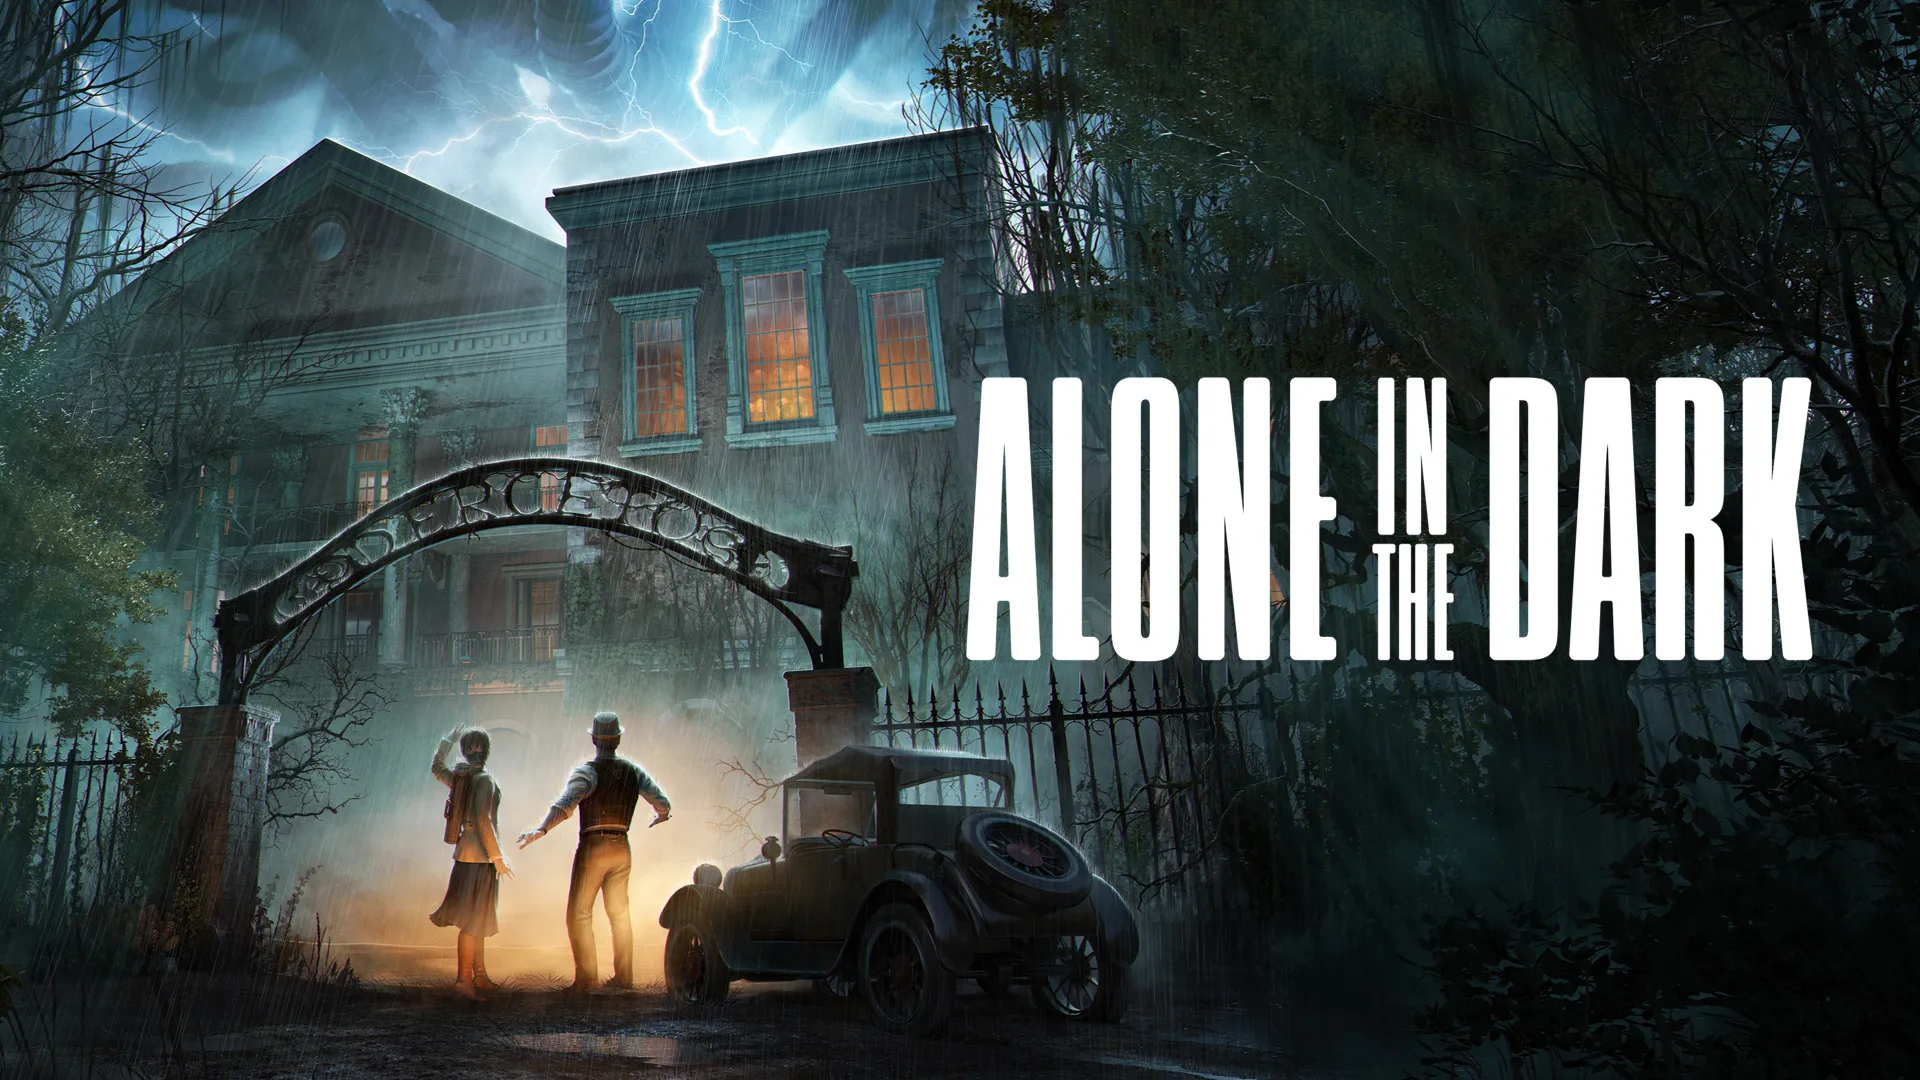 How is the new horror game Alone in the Dark?